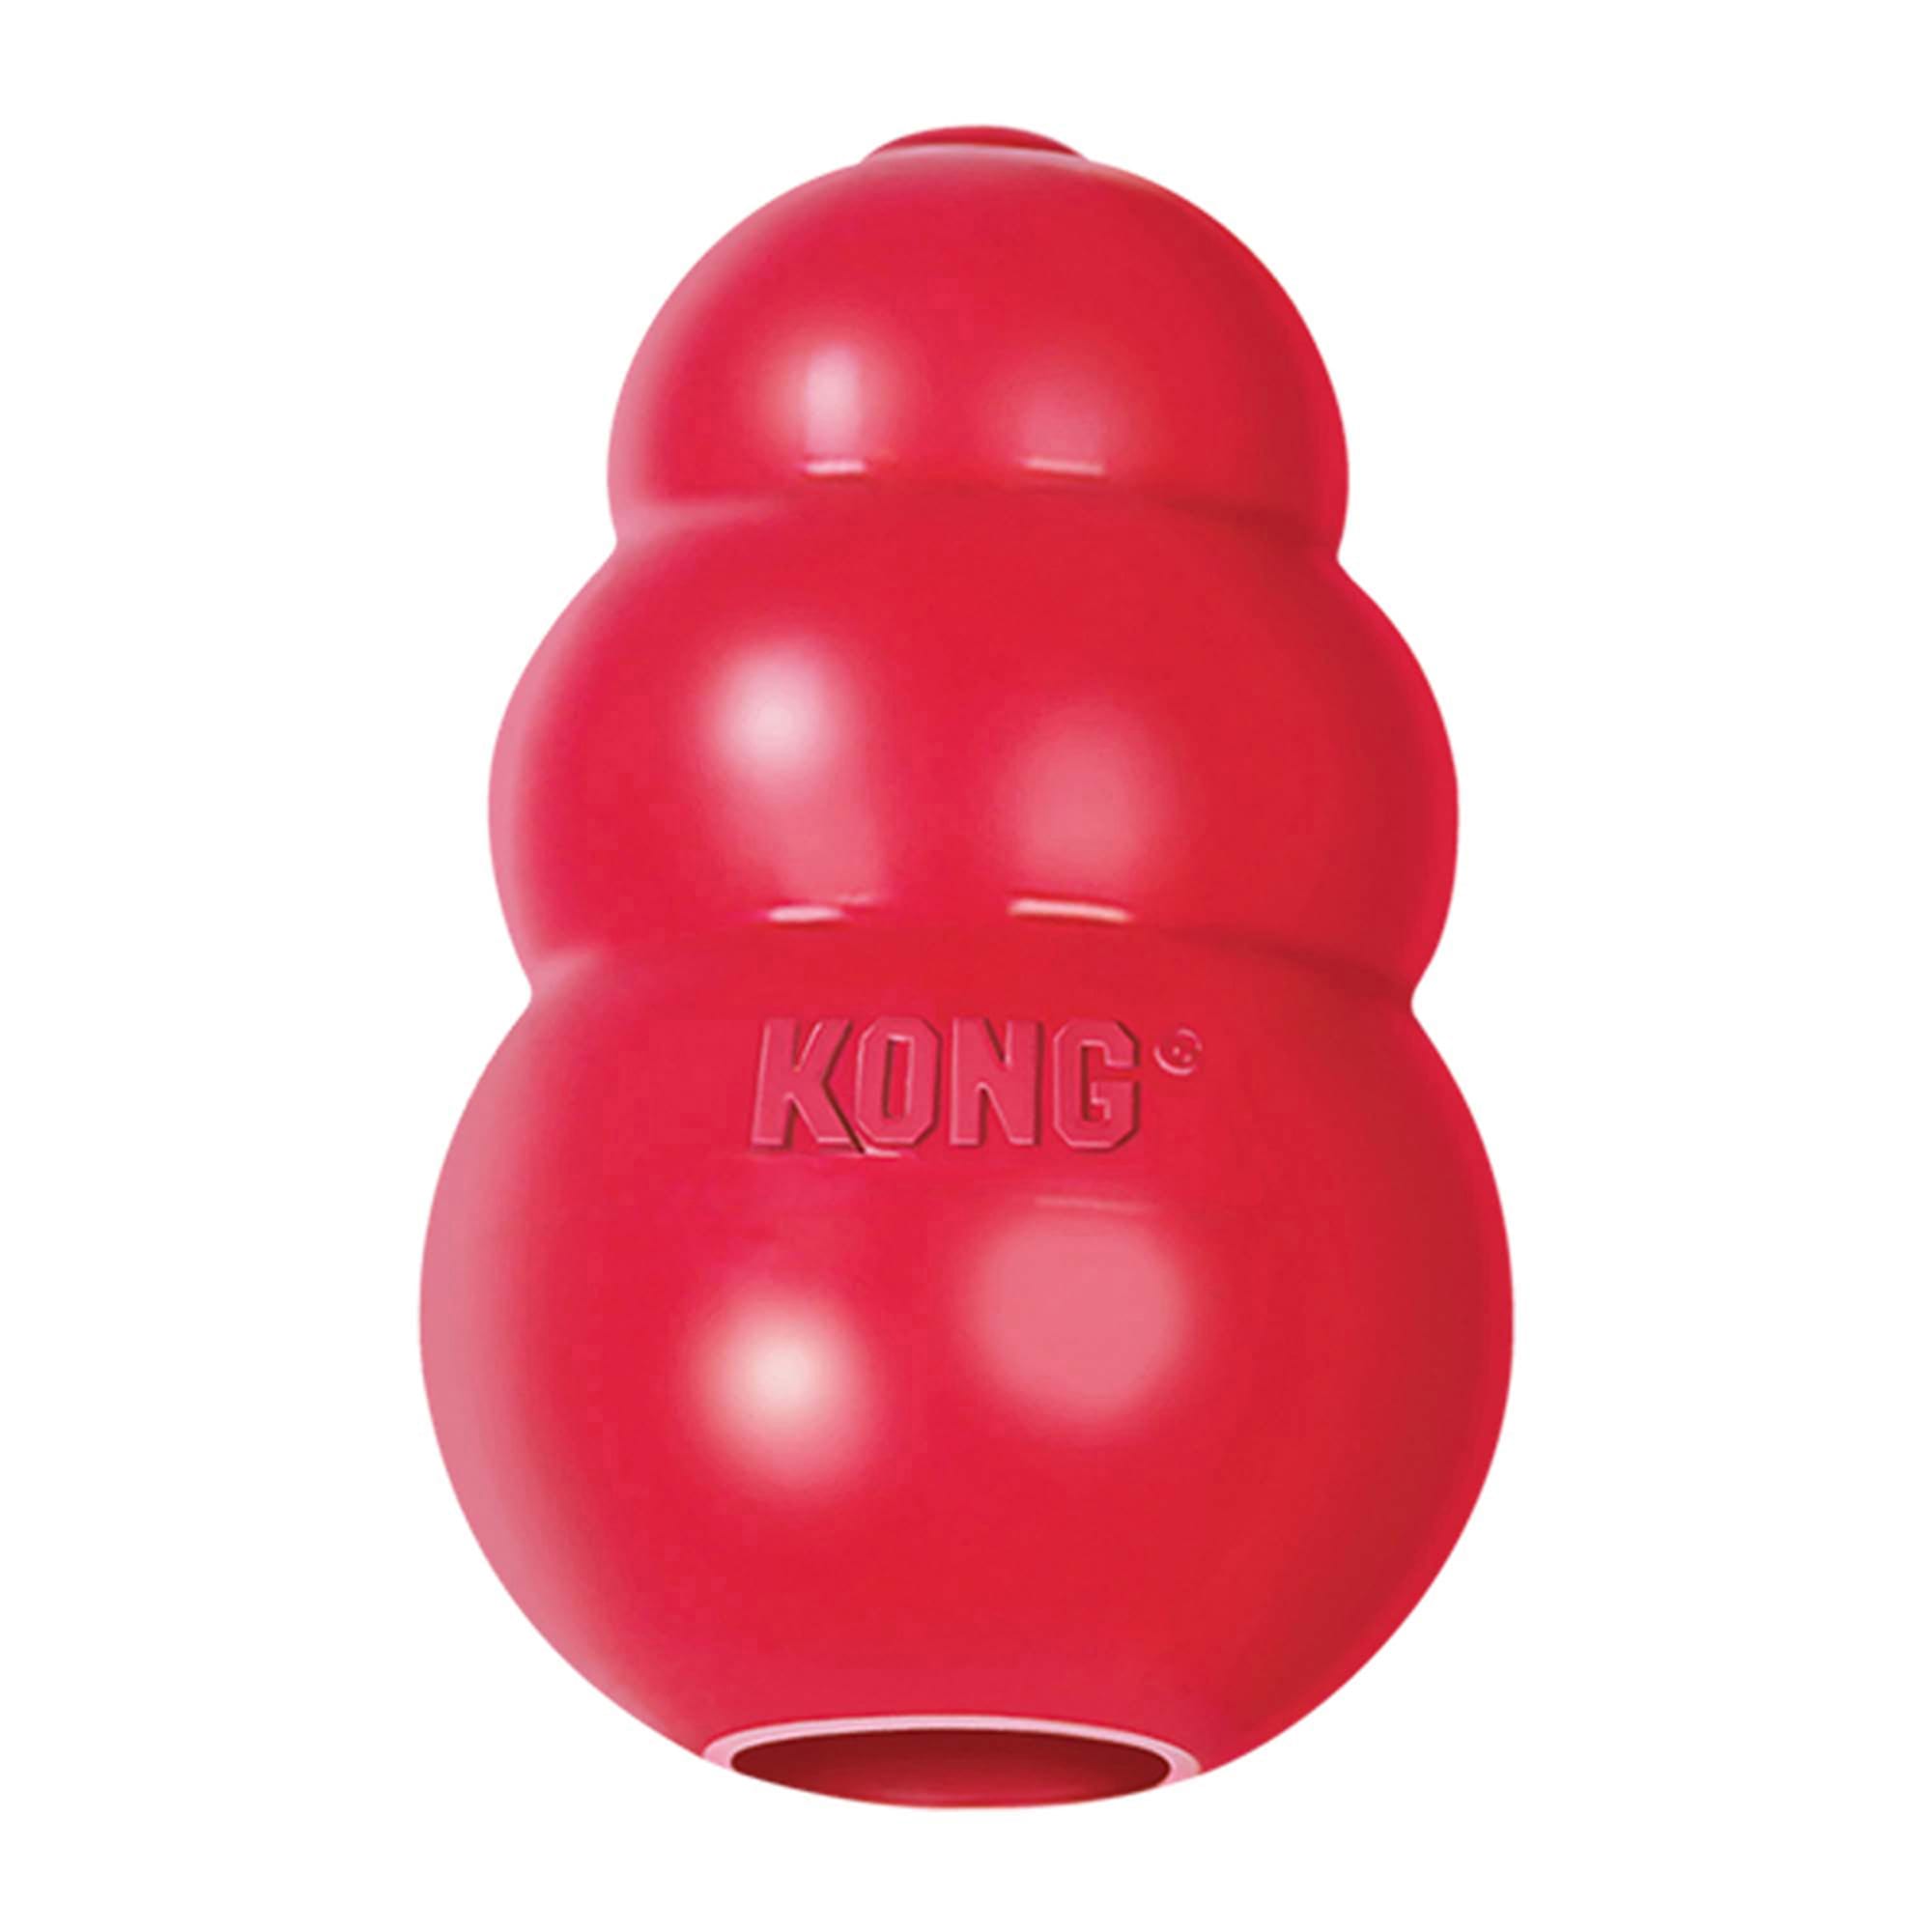 KONG Classic Natural Rubber Bouncy Dog Toy, Red, Small